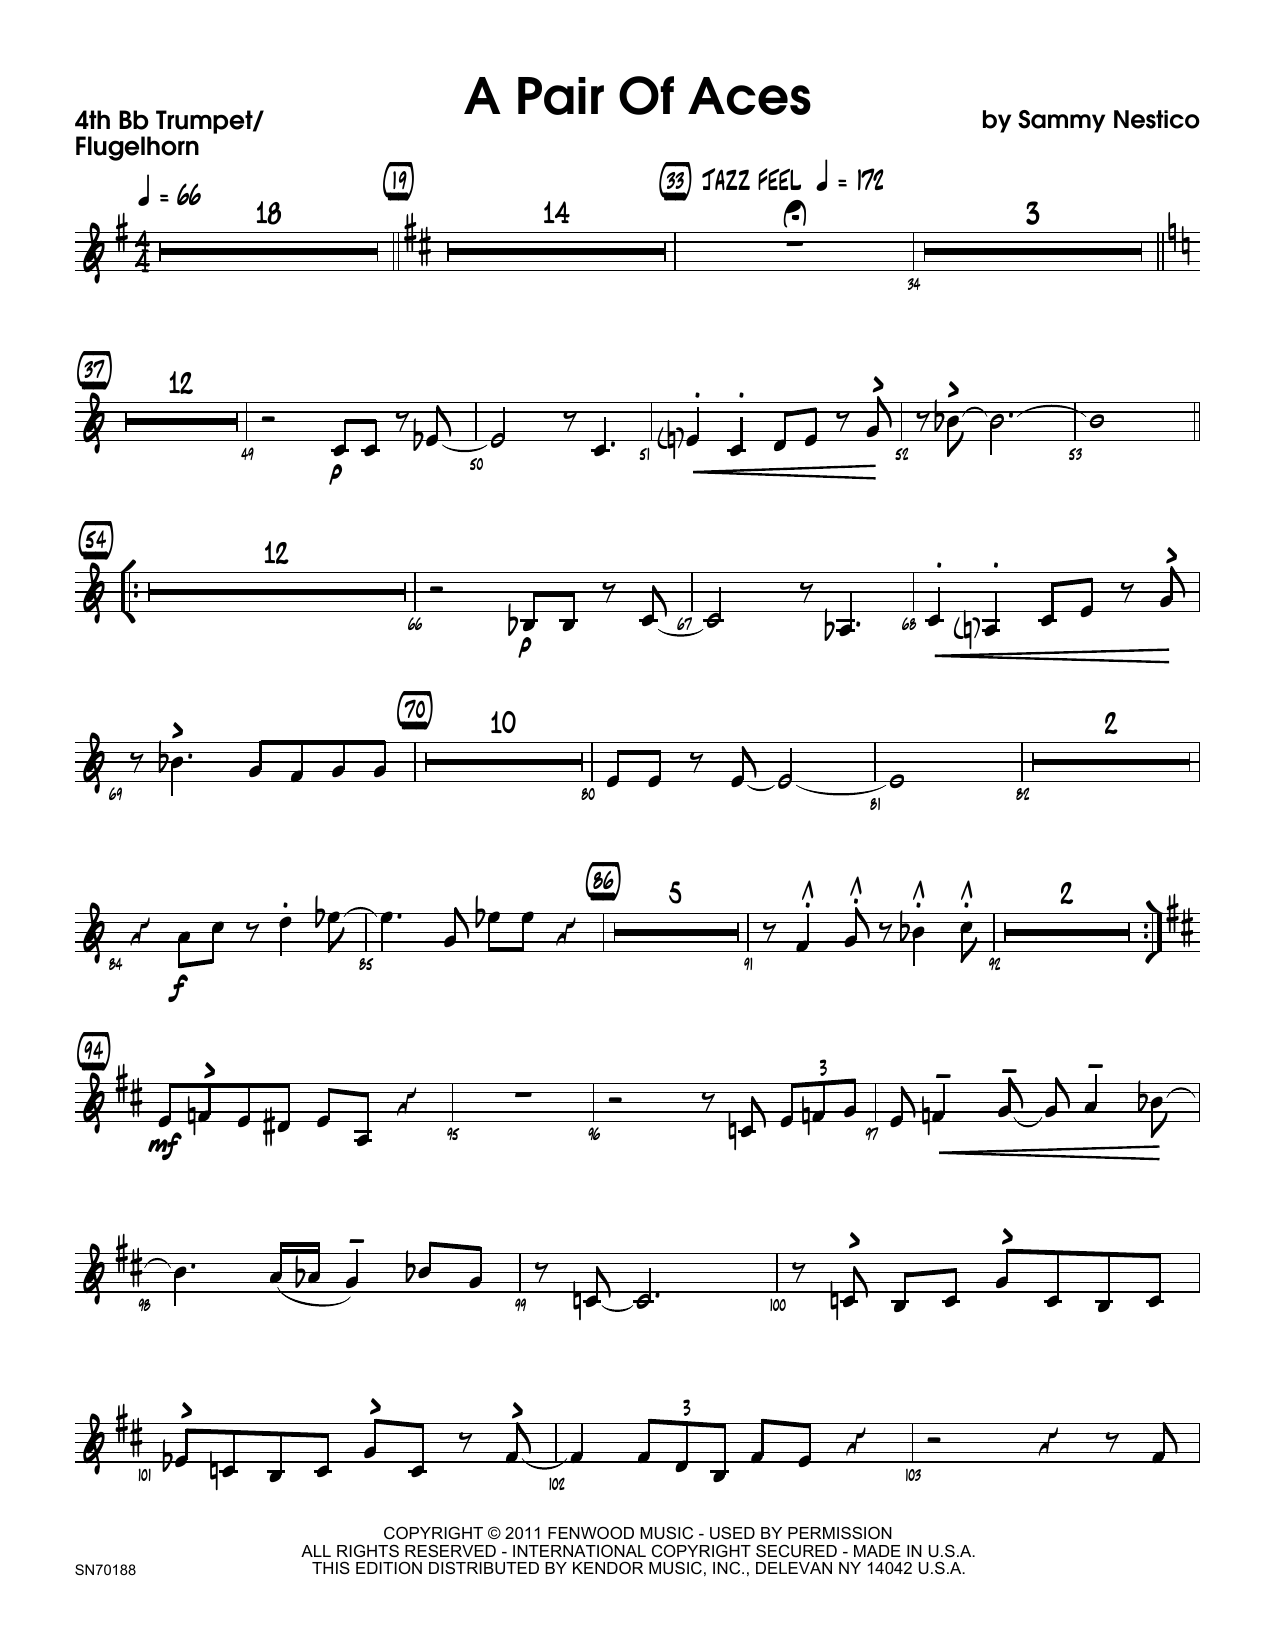 Download Sammy Nestico A Pair Of Aces - 4th Bb Trumpet Sheet Music